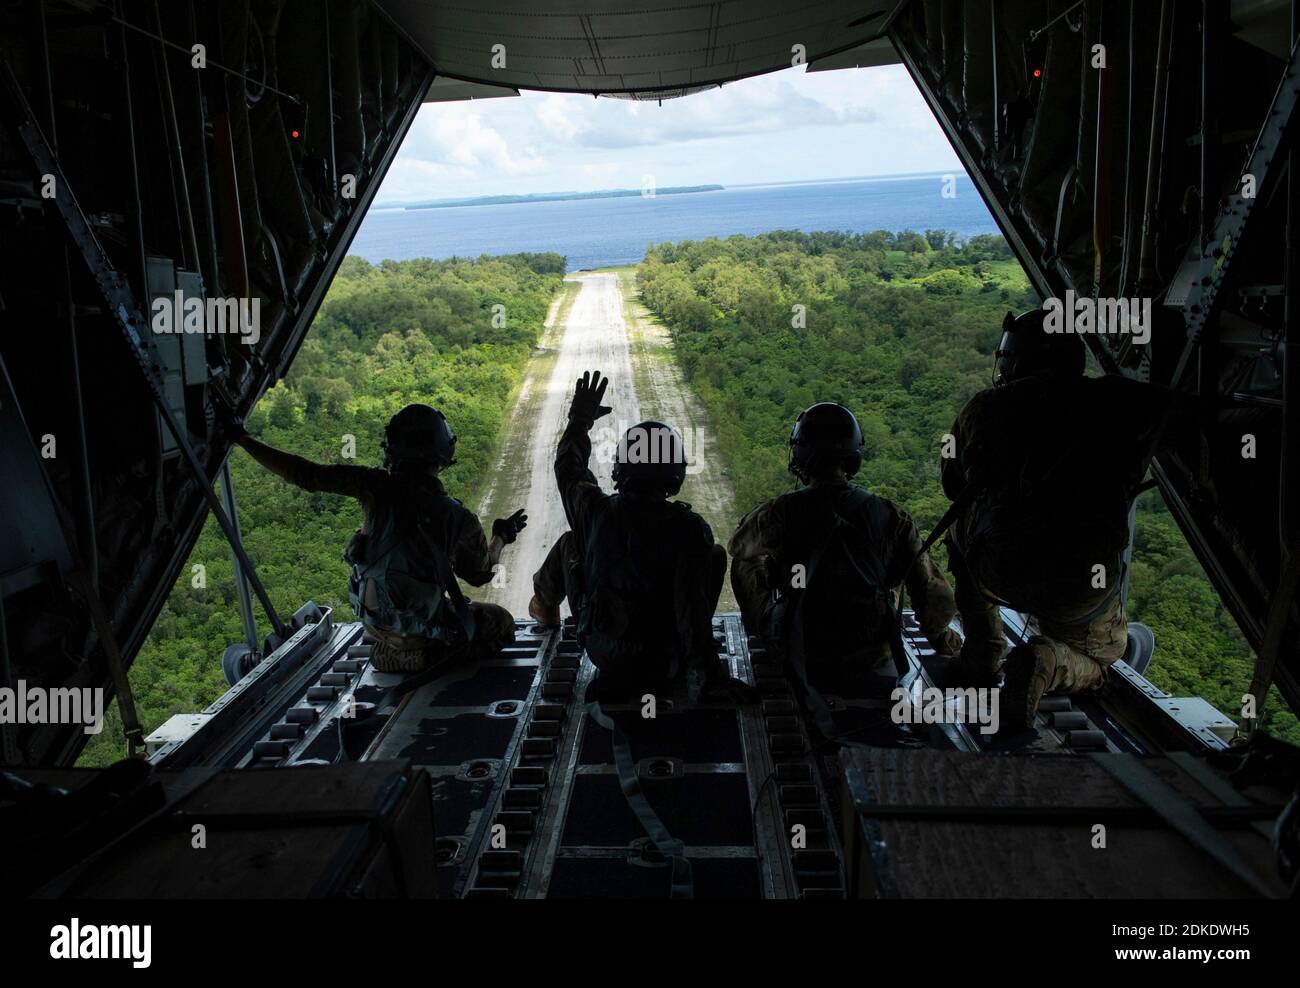 U.S. Air Force Brig. Gen. Jeremy T. Sloane, 36th Wing commander, center left, and 36th Airlift Squadron loadmasters, wave after airdropping bundles of donated goods during Operation Christmas Drop 2020 December 7, 2020 onto Angaur, Republic of Palau. Operation Christmas is the longest-running humanitarian airlift operation begun in 1952 to assist remote islanders scattered across 50 islands in the Pacific. Stock Photo